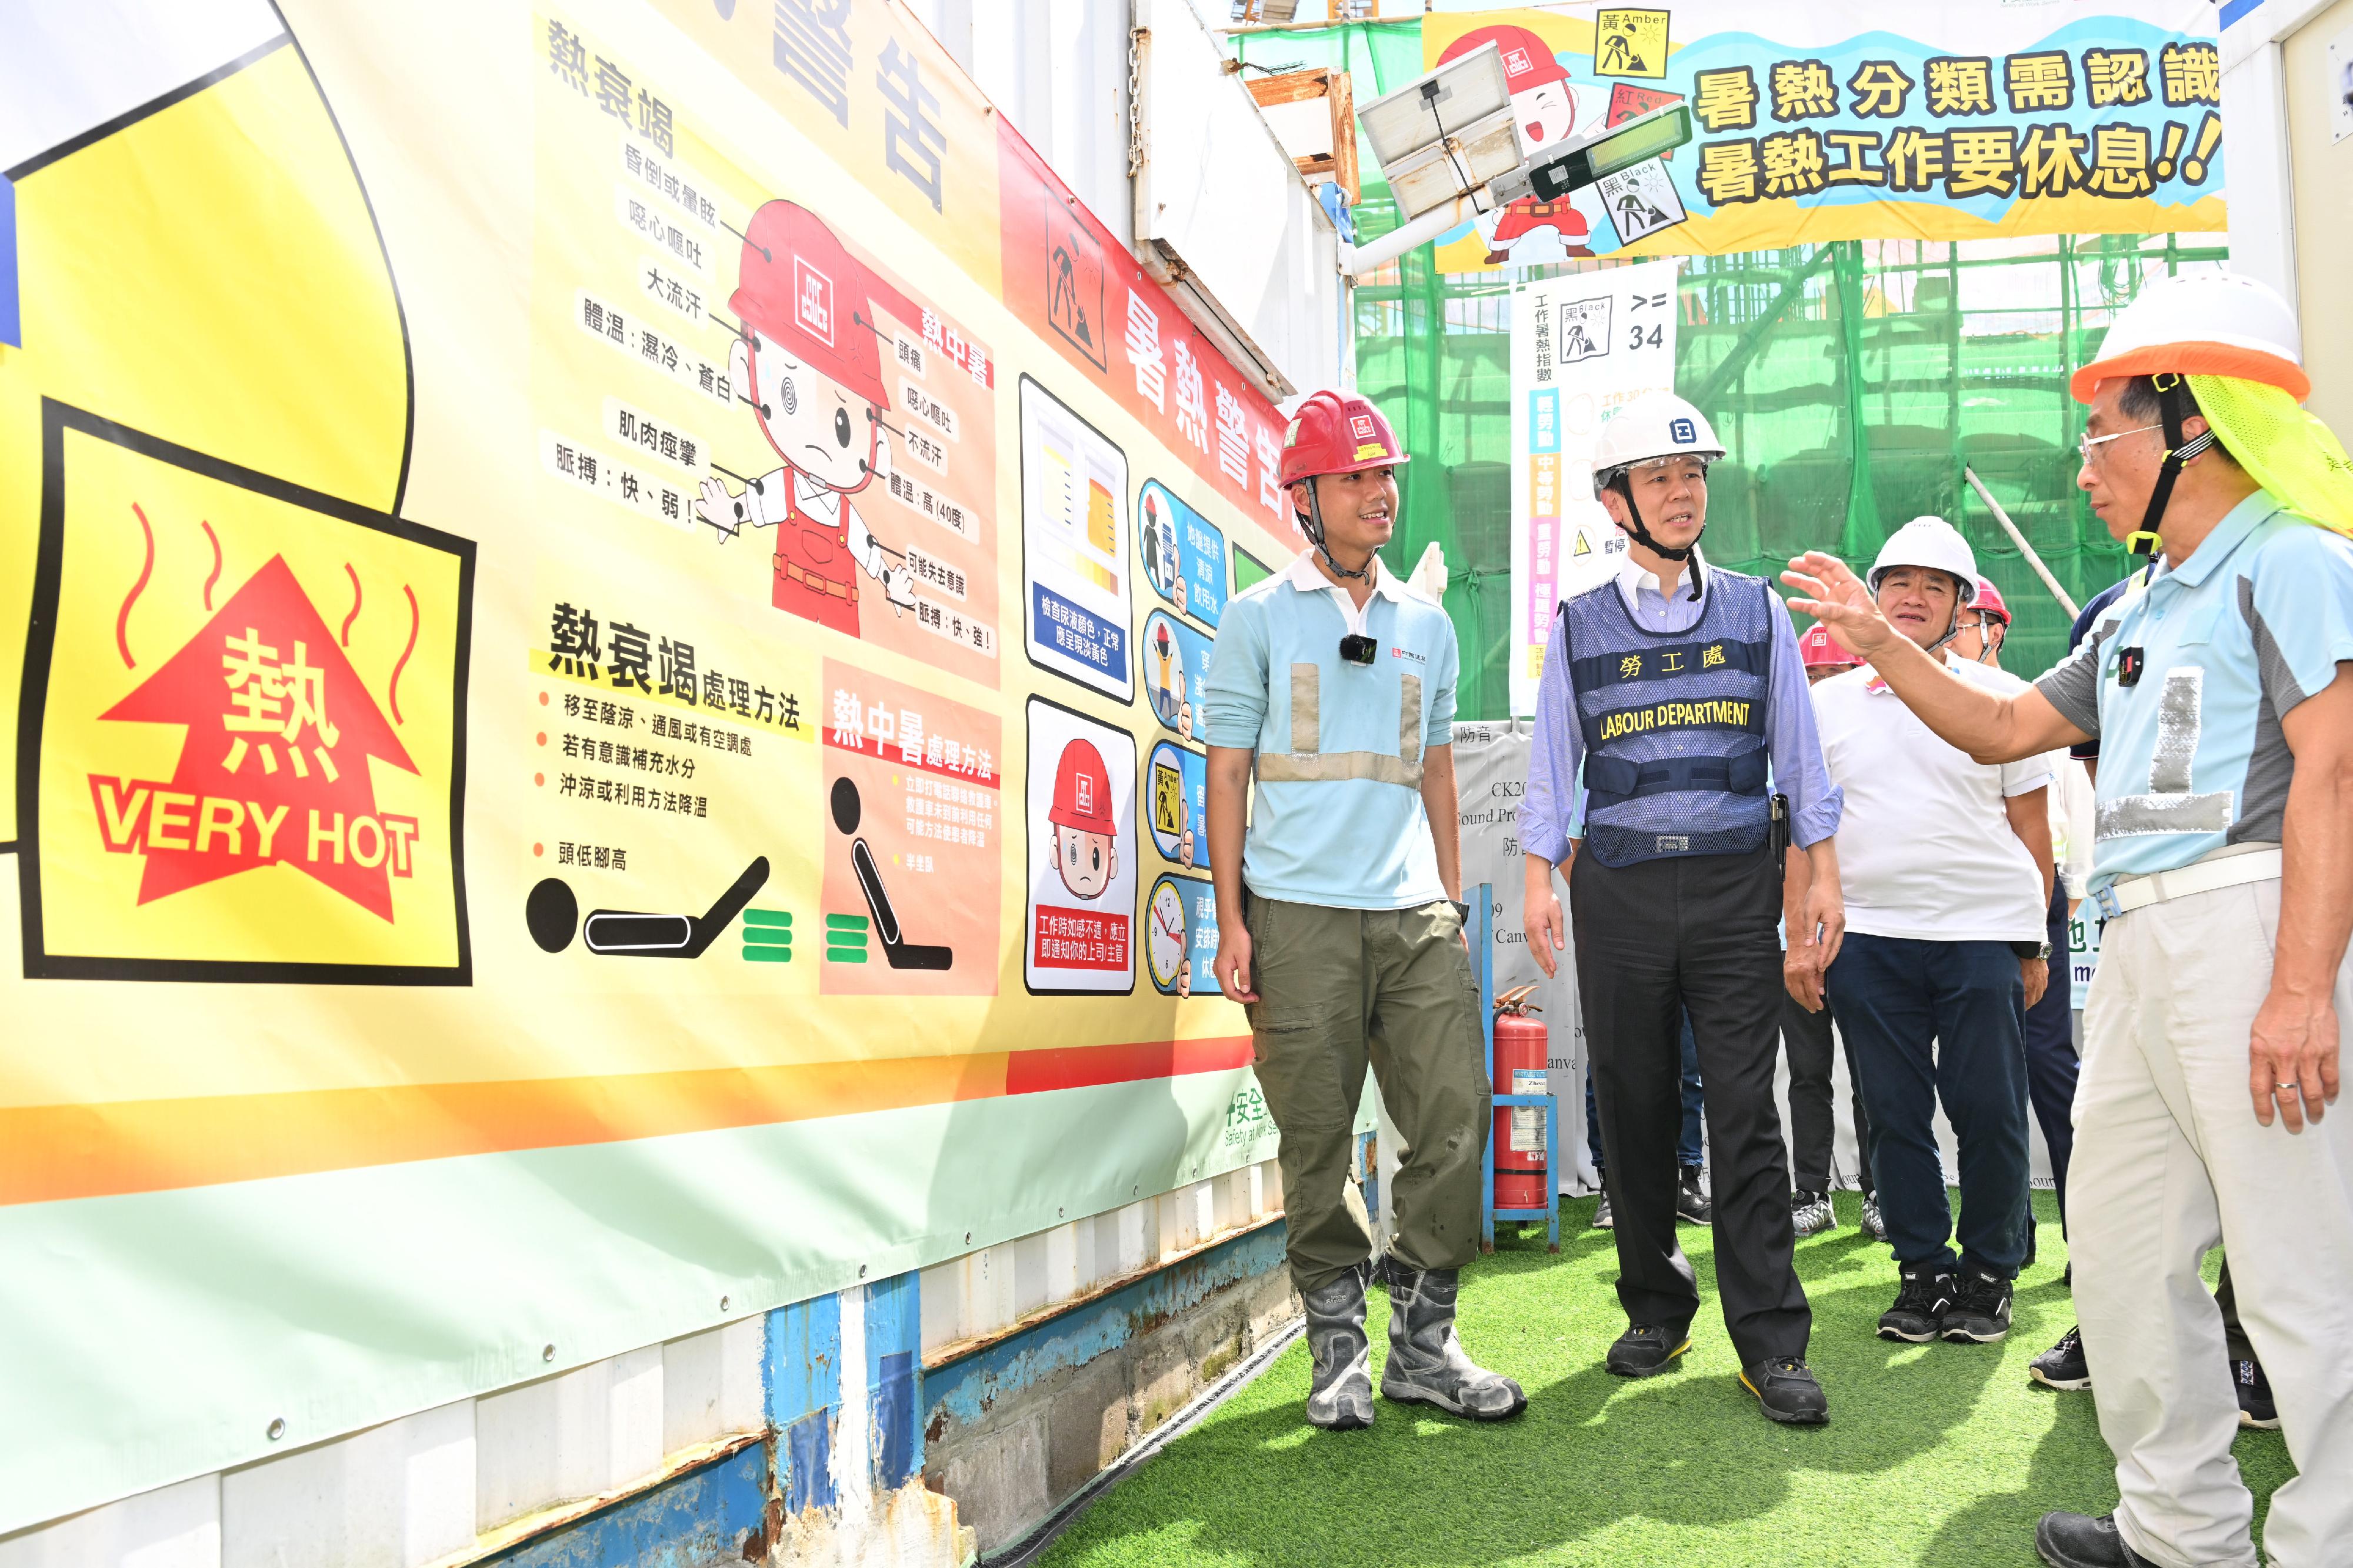 The Labour Department and representatives of the construction industry promoted prevention of heat stroke at work at a public works site in Tseung Kwan O today (June 9). Photo shows the Acting Commissioner for Labour, Mr Vincent Fung (second left); the Chairman of the Construction Industry Council, Mr Thomas Ho (first right); and member of the Construction Industry Council and Chairman of the Hong Kong Construction Sub-contractor Association, Mr Chan Kim-kwong (second right), being briefed by staff on heat stroke preventive measures at the construction site.